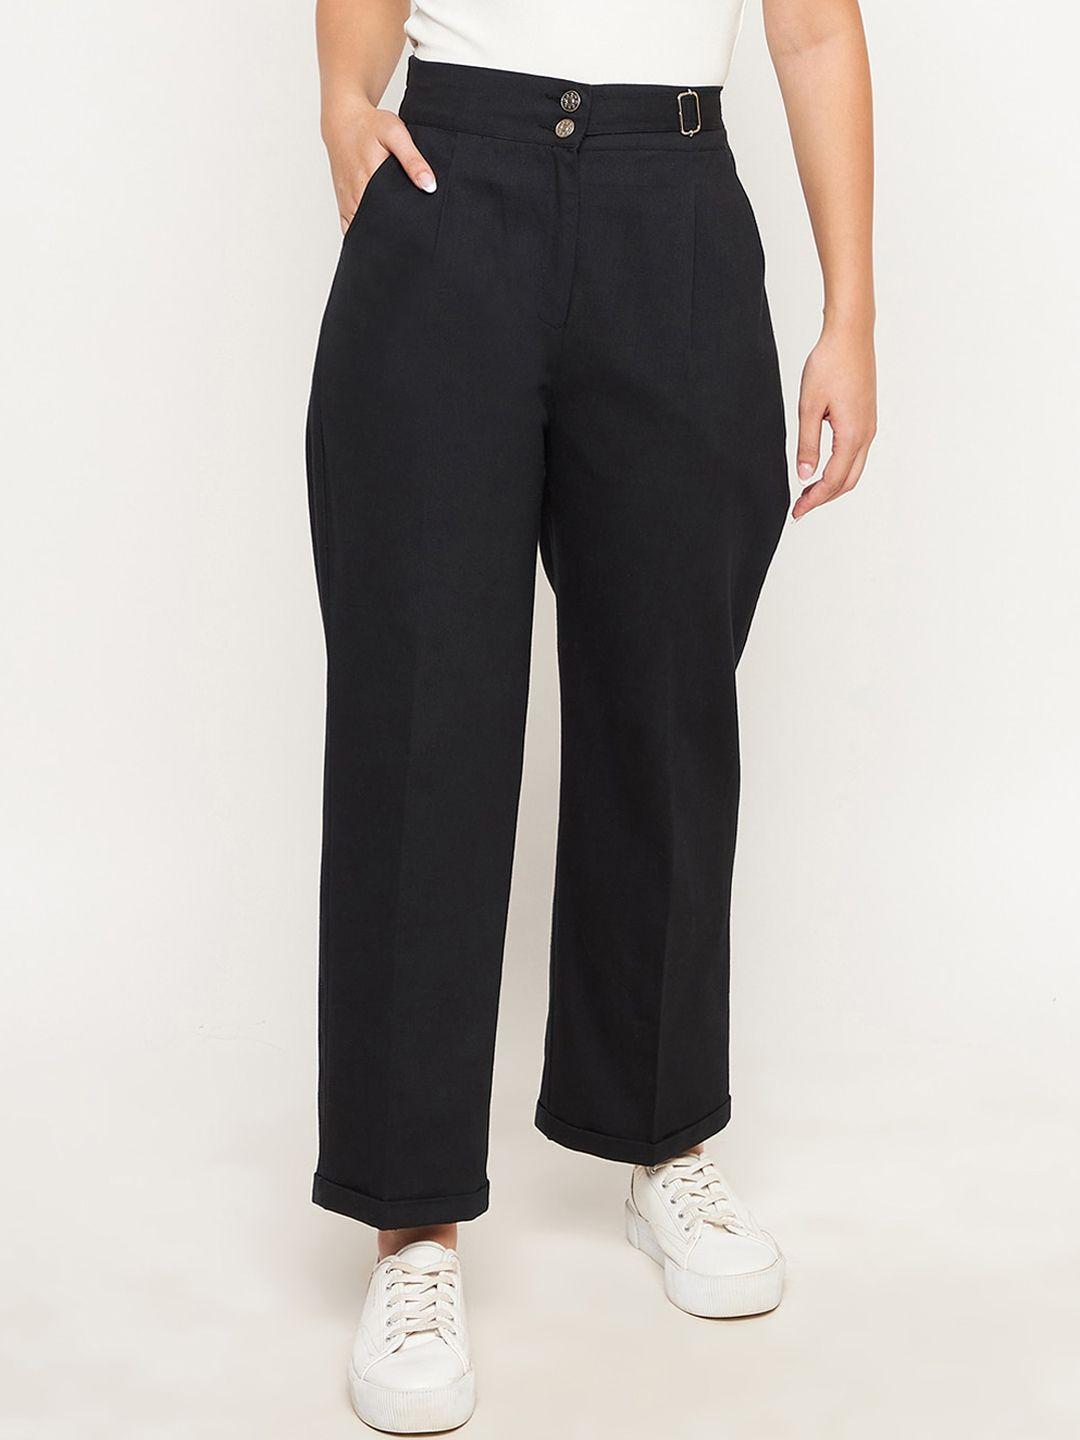 WineRed Women Black Solid Easy Wash Trousers with buckle